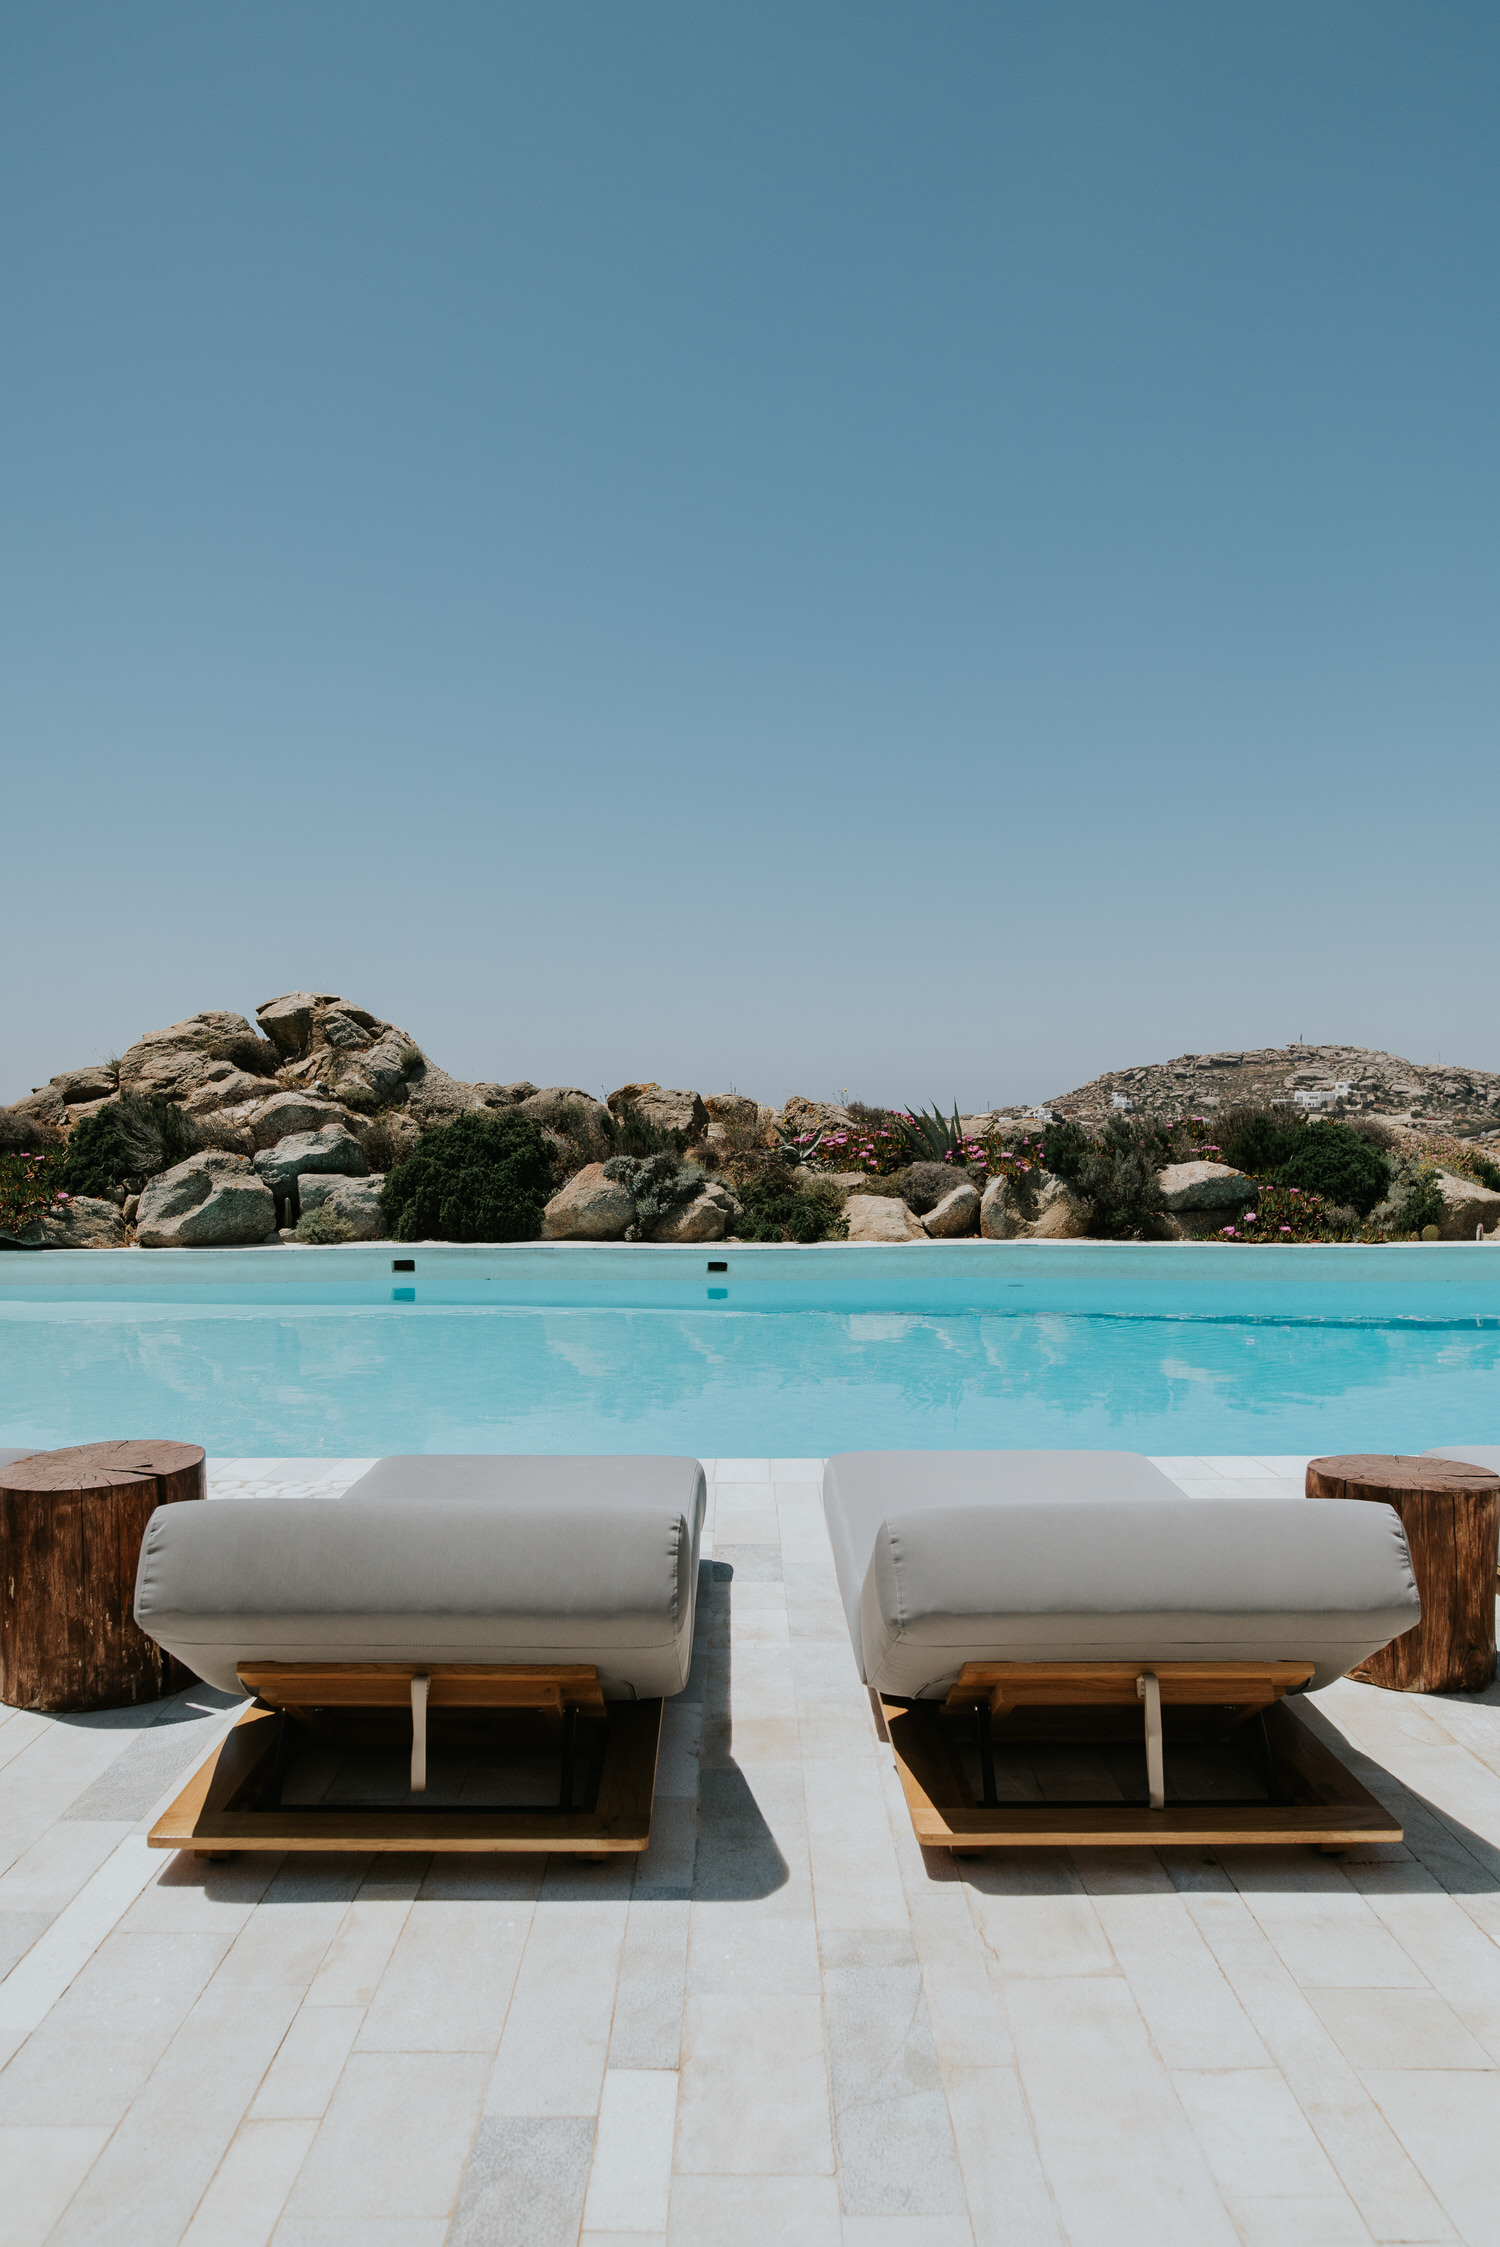 Mykonos wedding photographer: sun beds await at the pool with its turquoise water surrounded by Mykonian rocks and wild herbs.